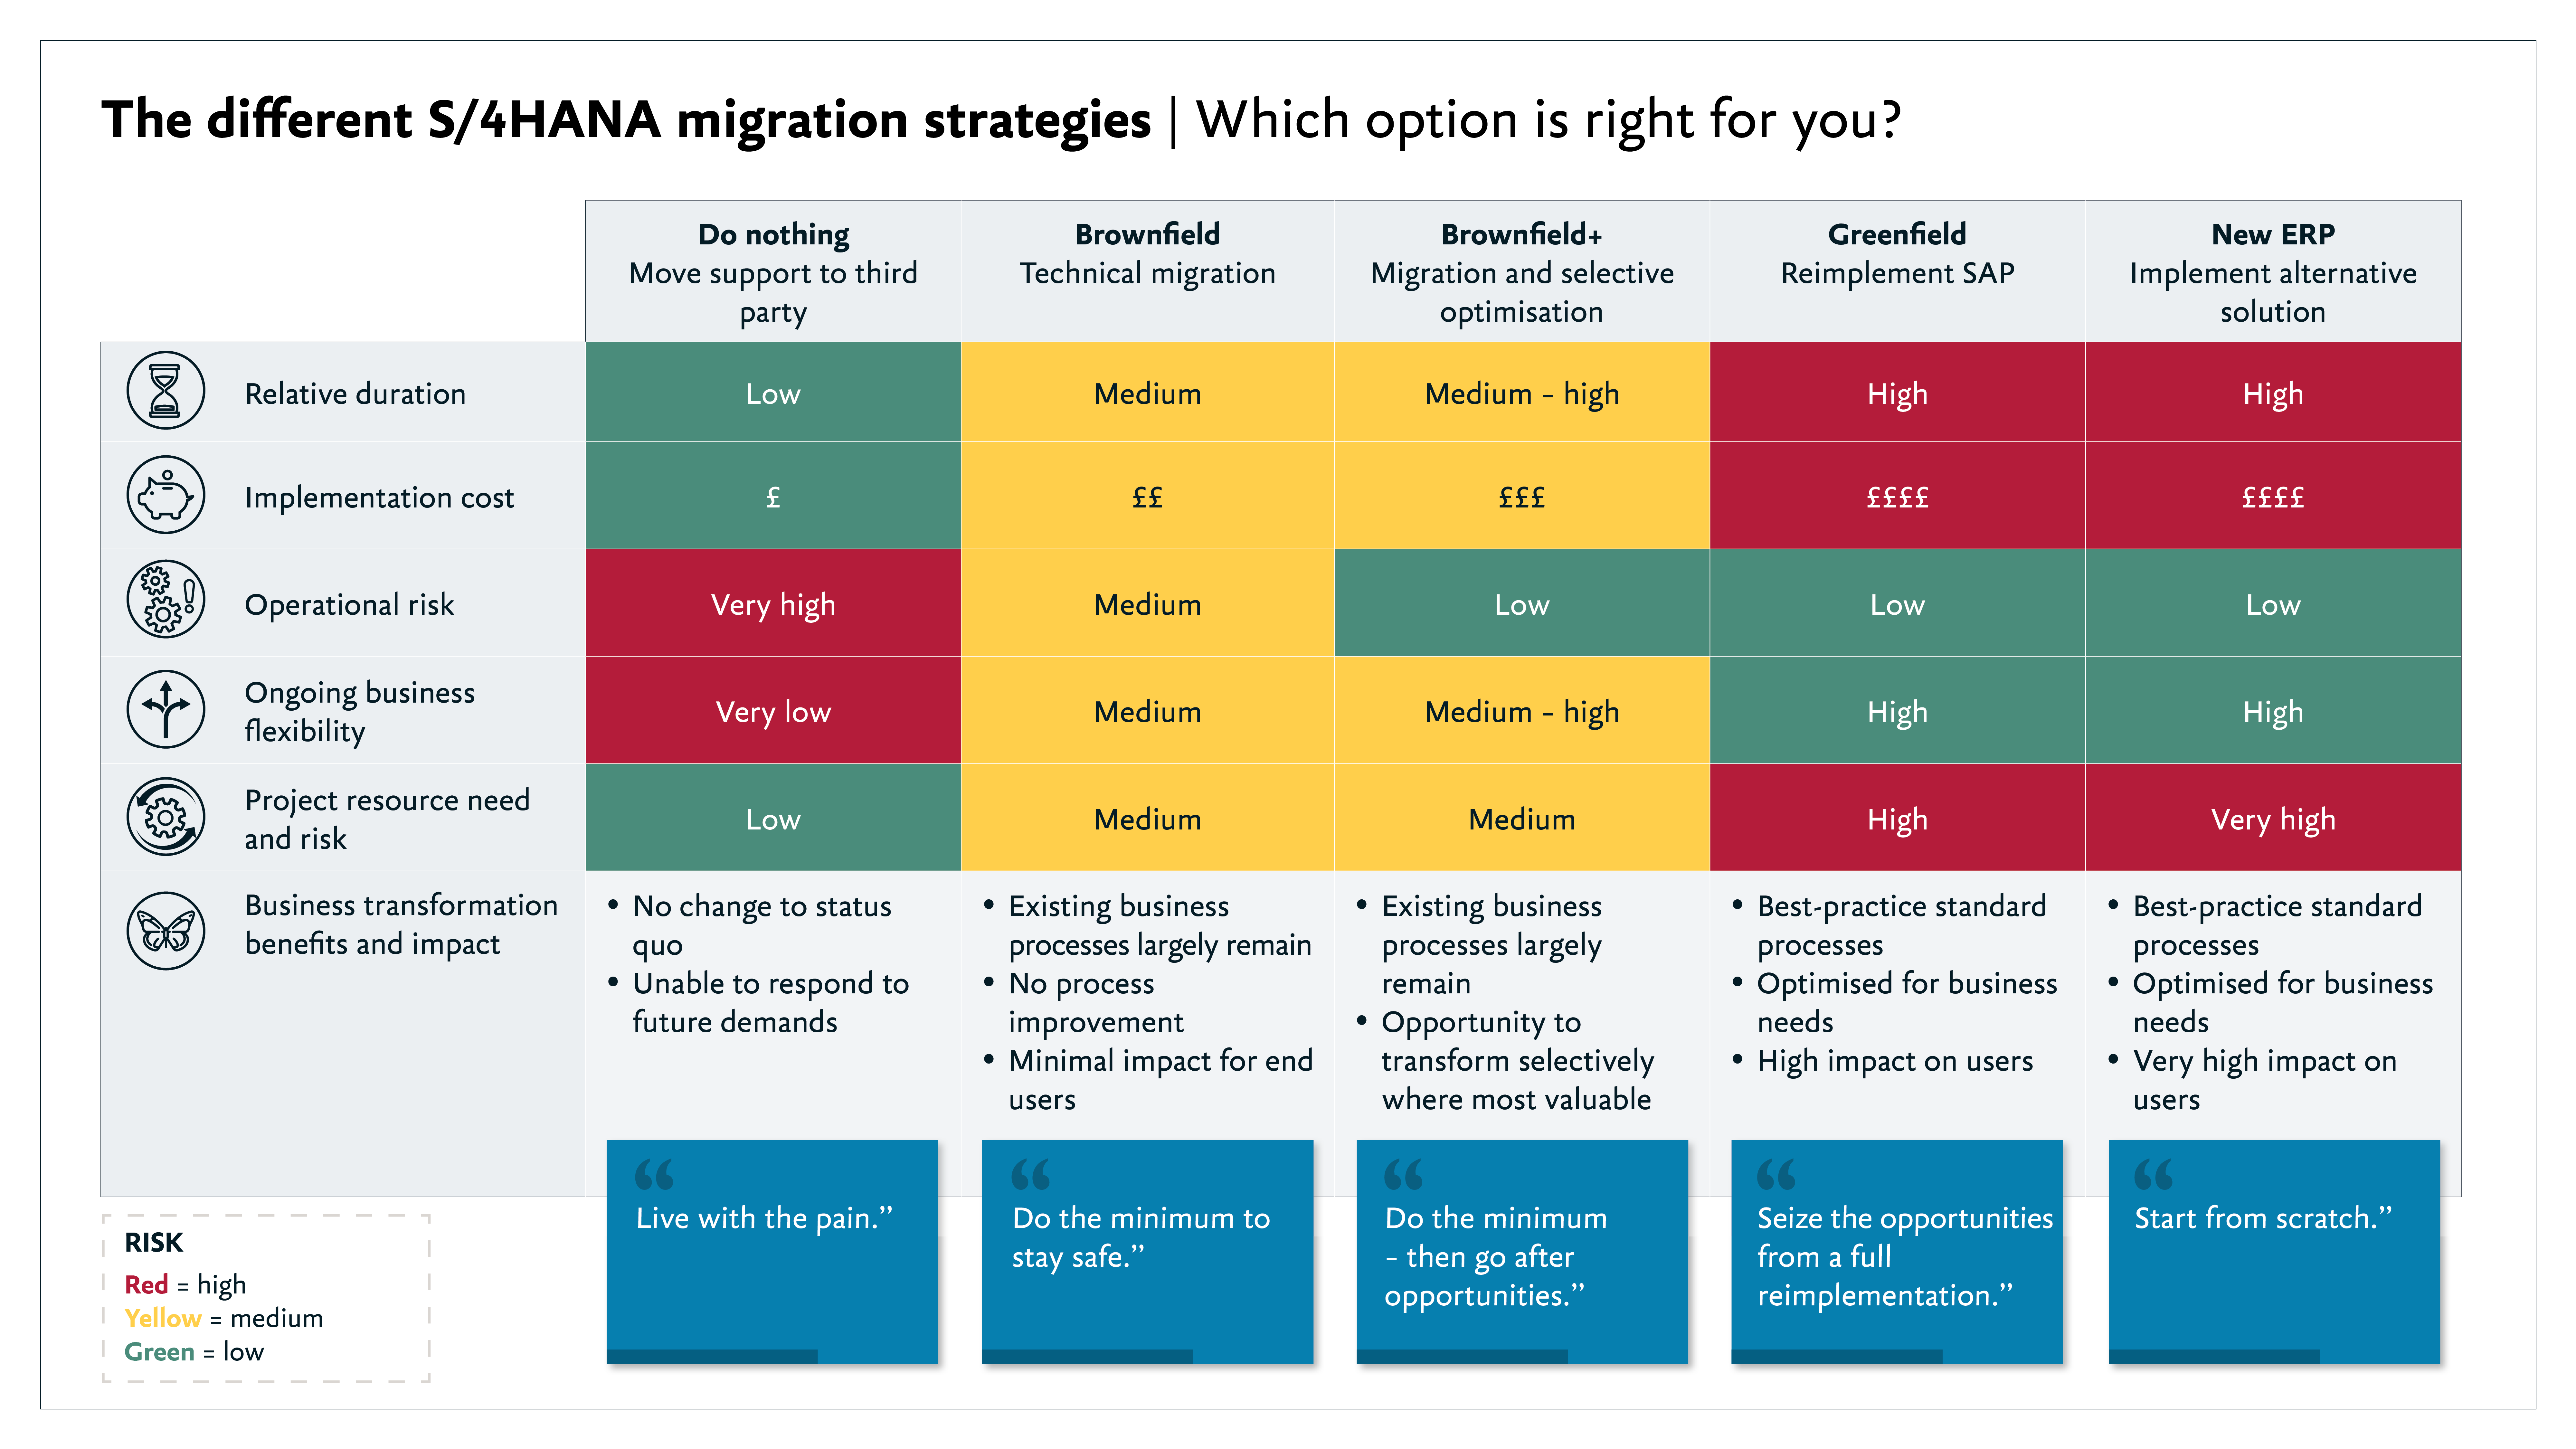 A comparison table of S/4HANA migration strategies and their risks and benefits.